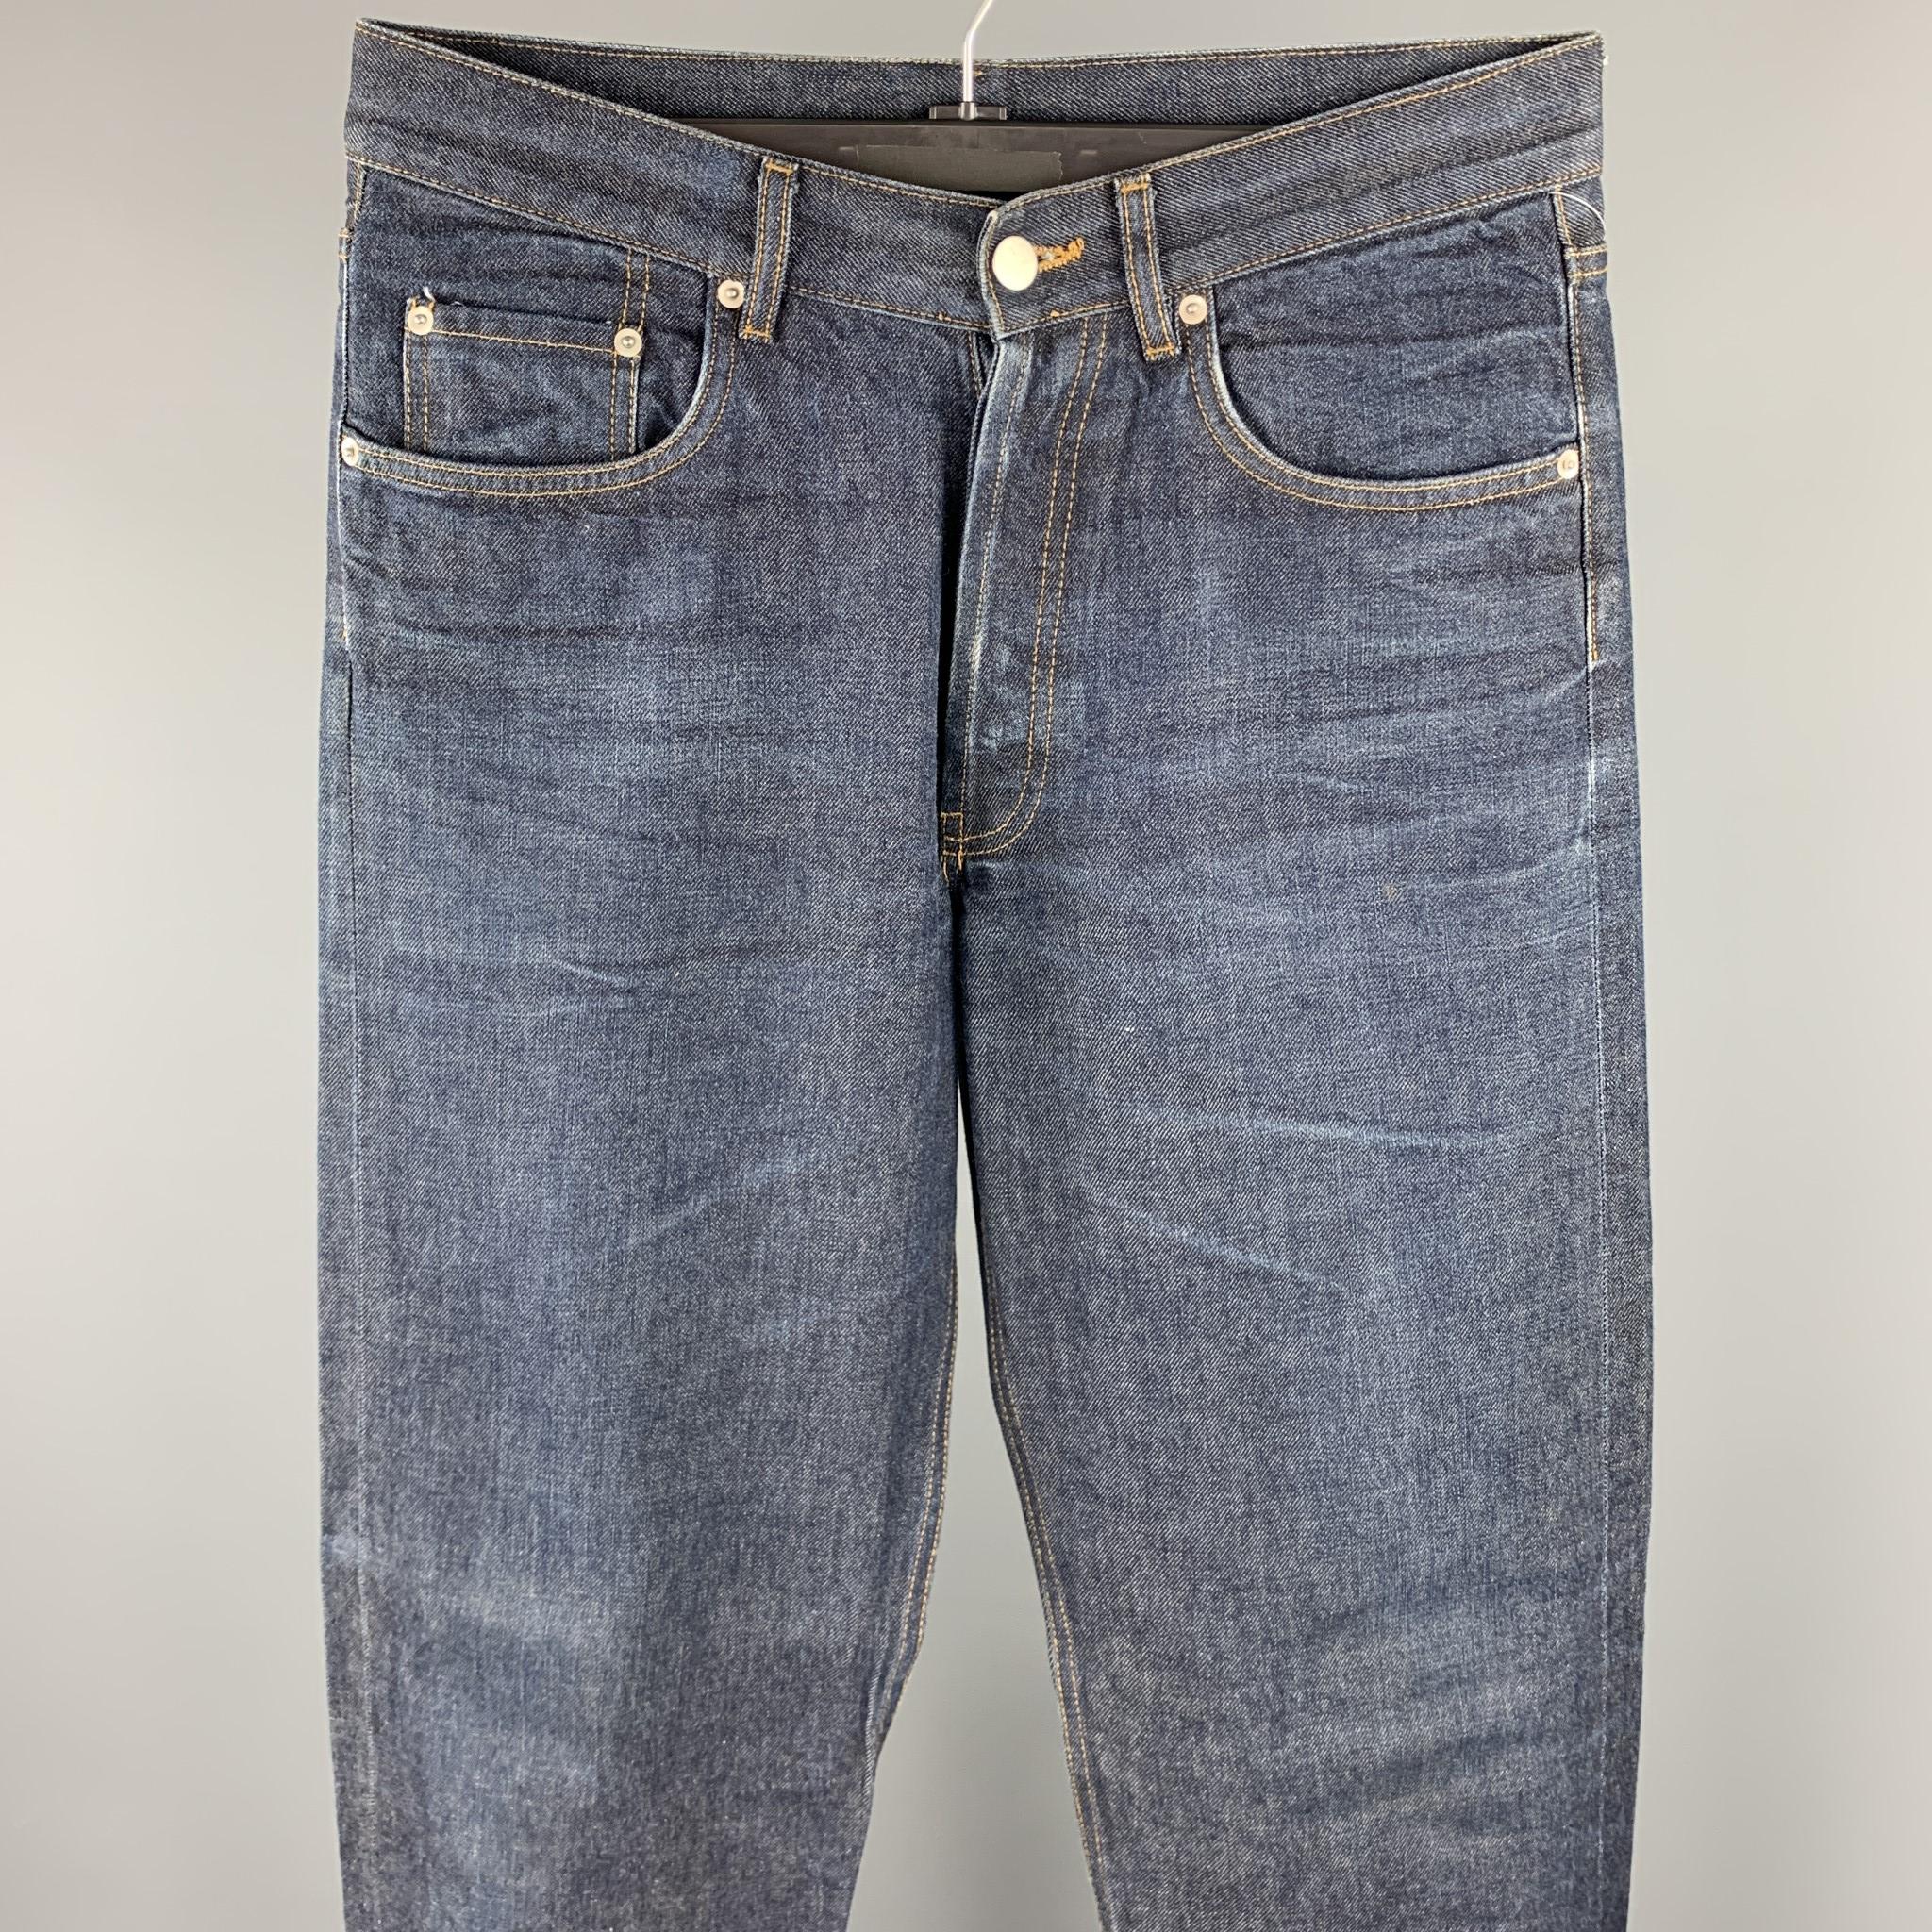 DANIEL CLEARLY jeans comes in a indigo wash selvedge denim featuring a regular fit, contrast stitching, and a button fly closure. 

Excellent Pre-Owned Condition.
Marked: 32

Measurements:

Waist: 32 in. 
Rise: 10 in. 
Inseam: 36 in. 
SKU: